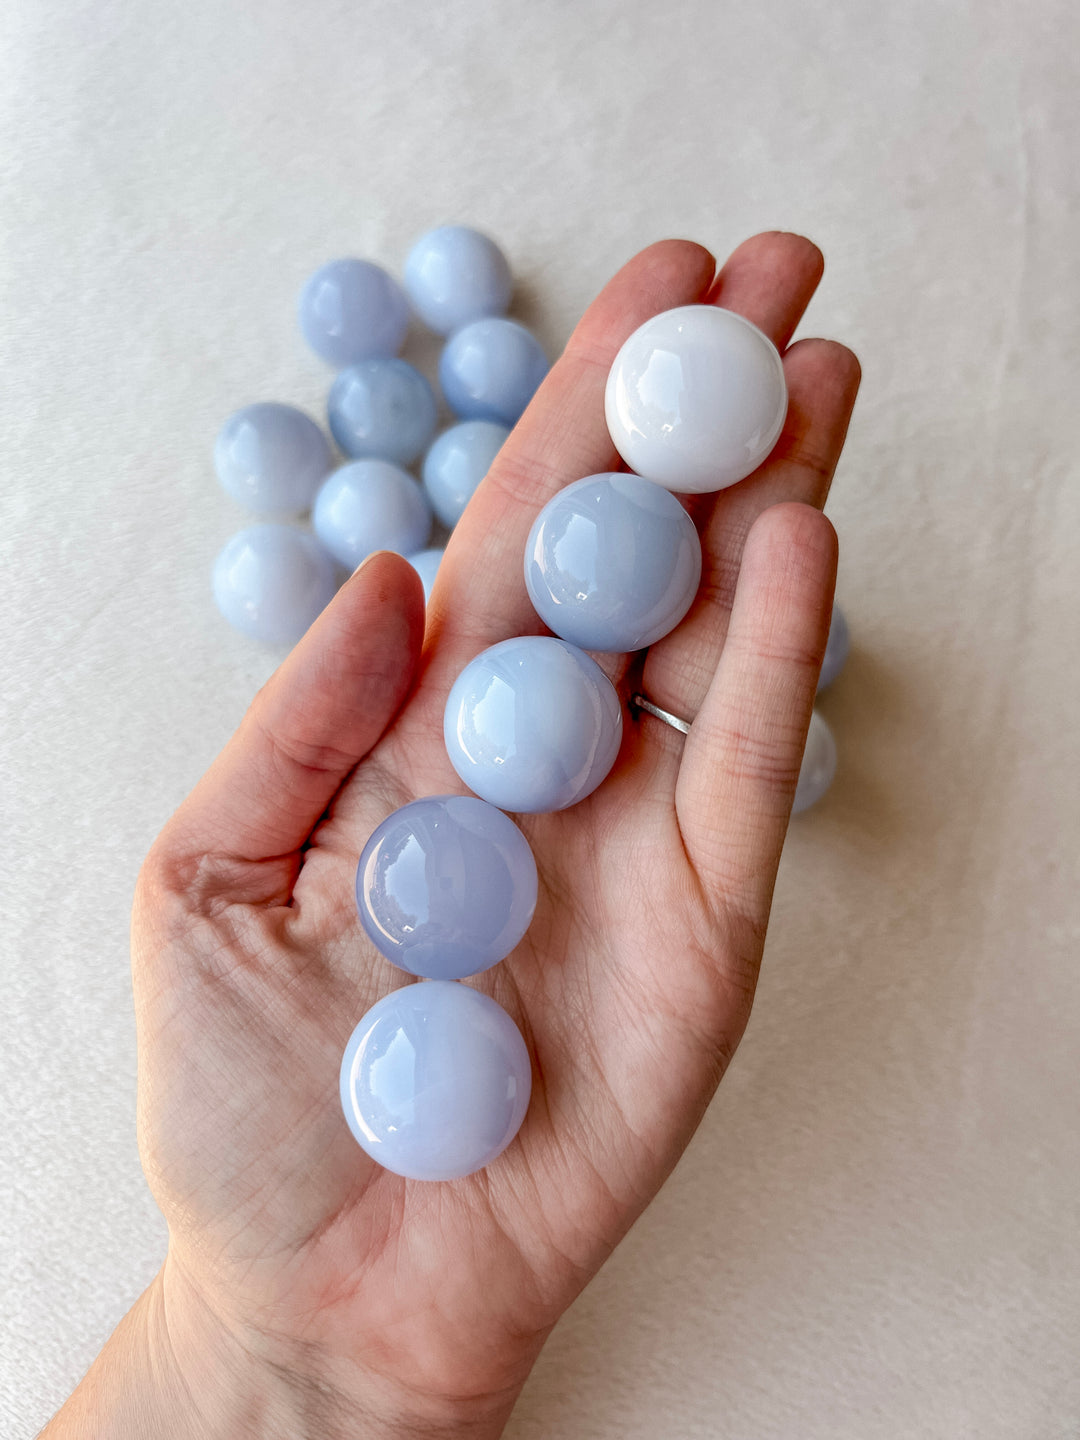 Blue Chalcedony Sphere // Self-Reflection + Open Your Heart